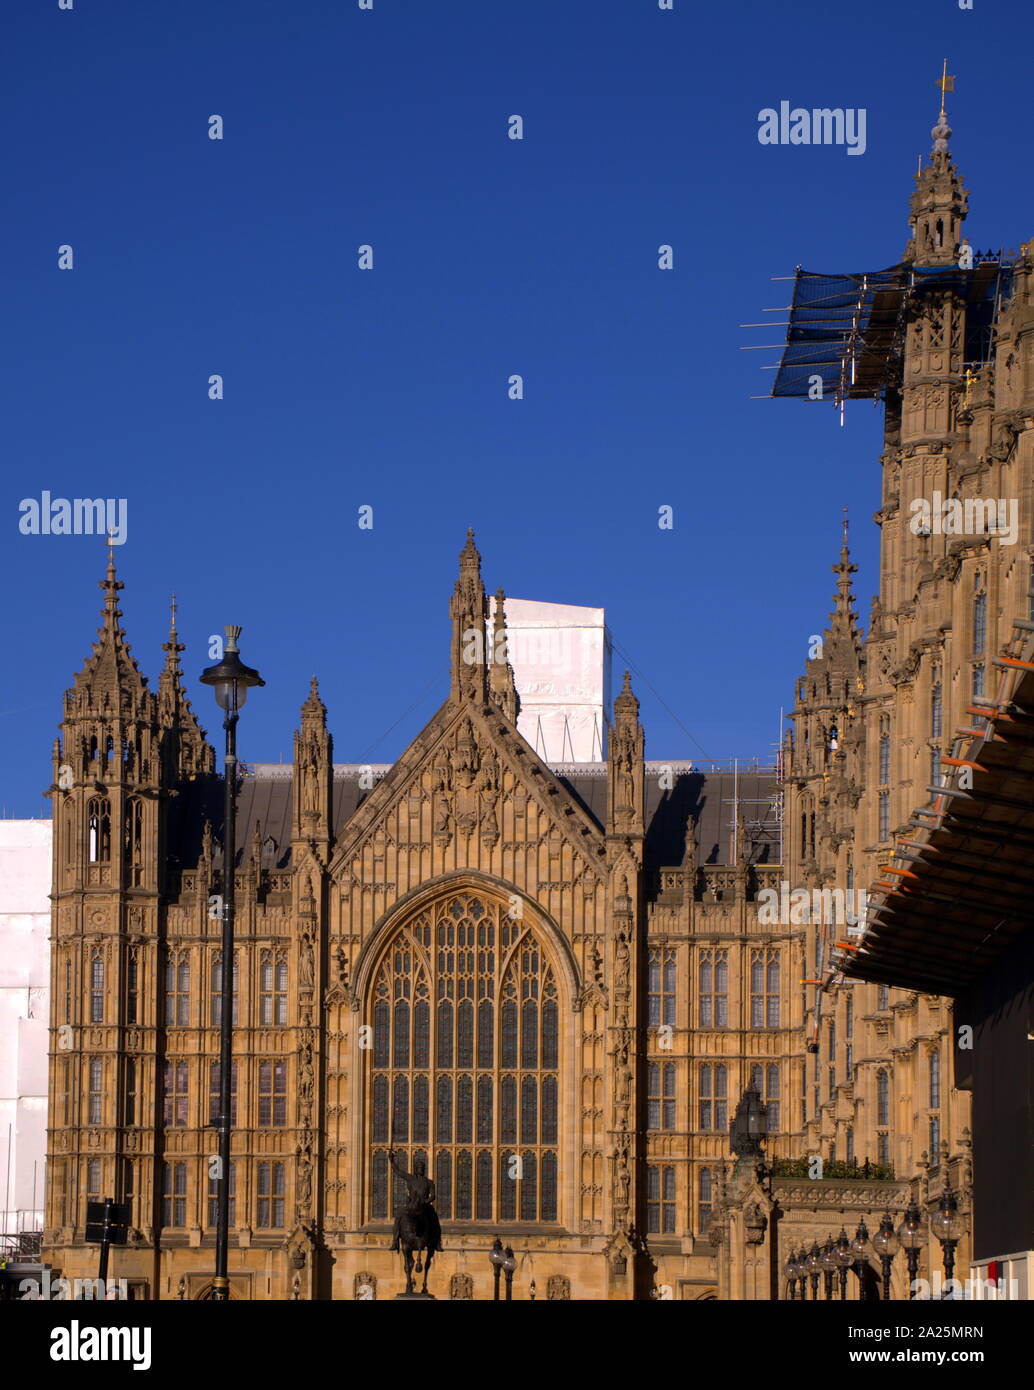 Exterior of the Palace of Westminster, the meeting place of the House of Commons and the House of Lords, the two houses of the Parliament of the United Kingdom Stock Photo